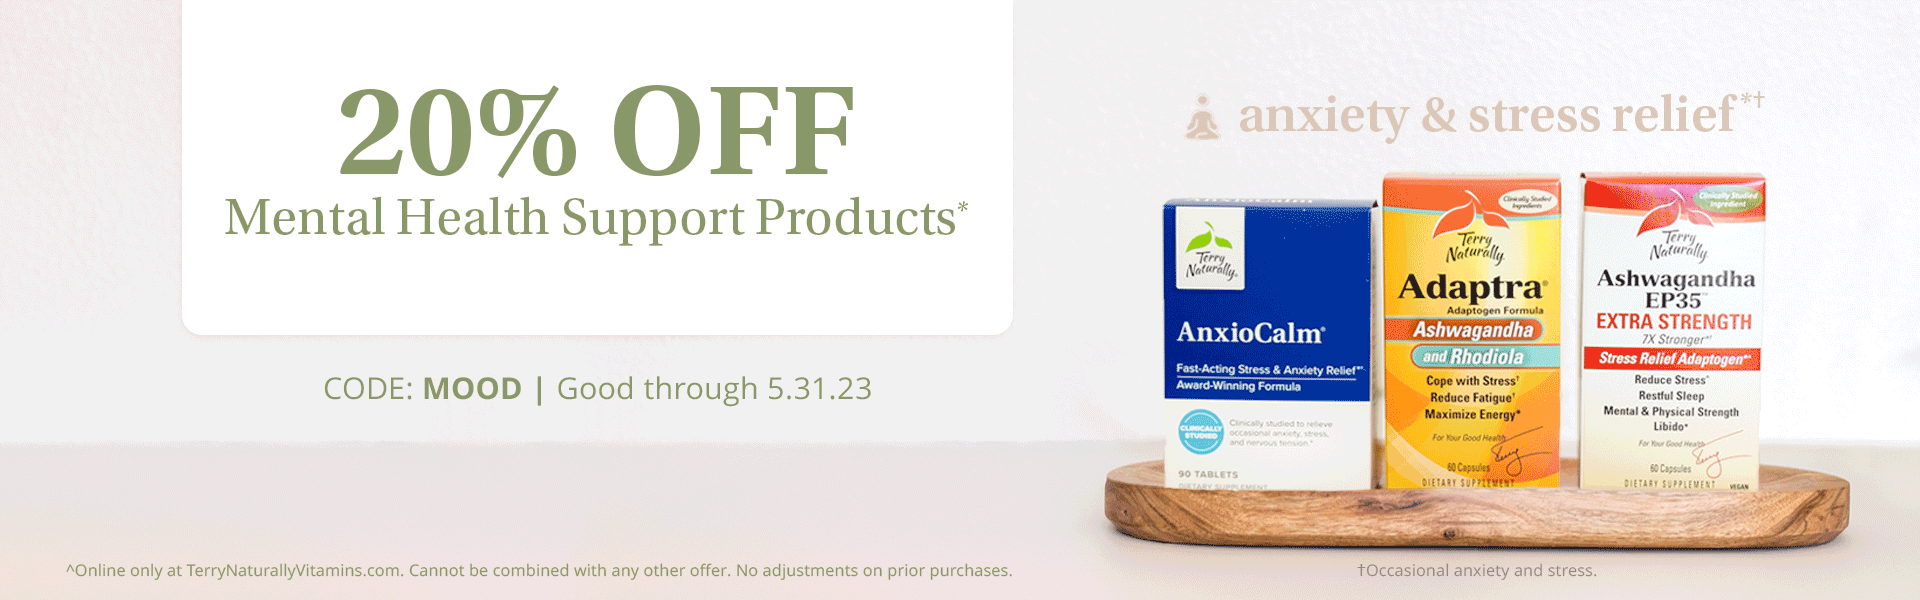 20% Off Mental Health Support Products*